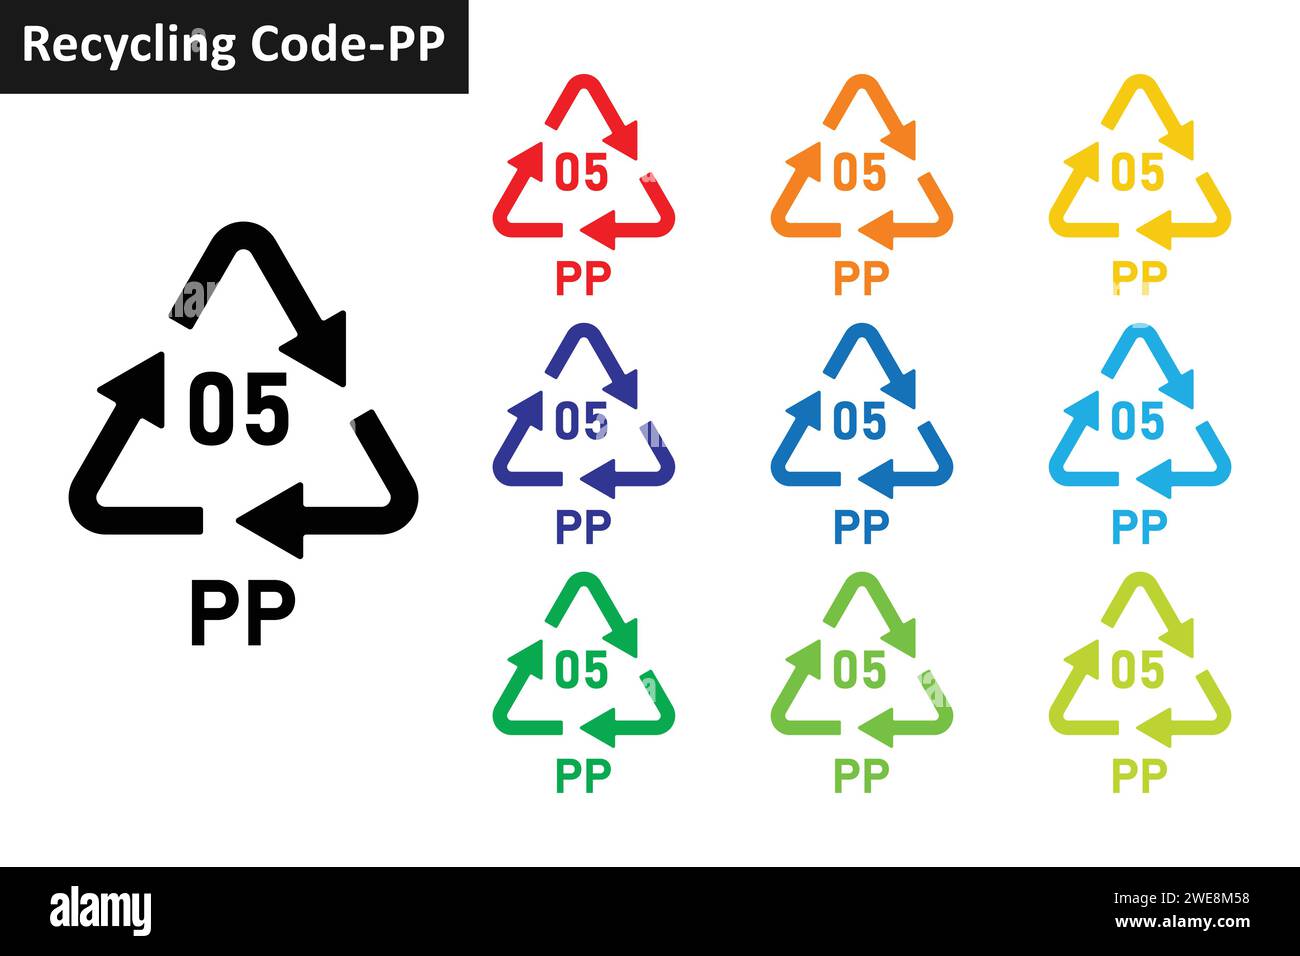 PP plastic recycling code icon set. Plastic recycling symbol 05 PP. Plastic recycling code 05 icon collection in ten different colors. Stock Vector